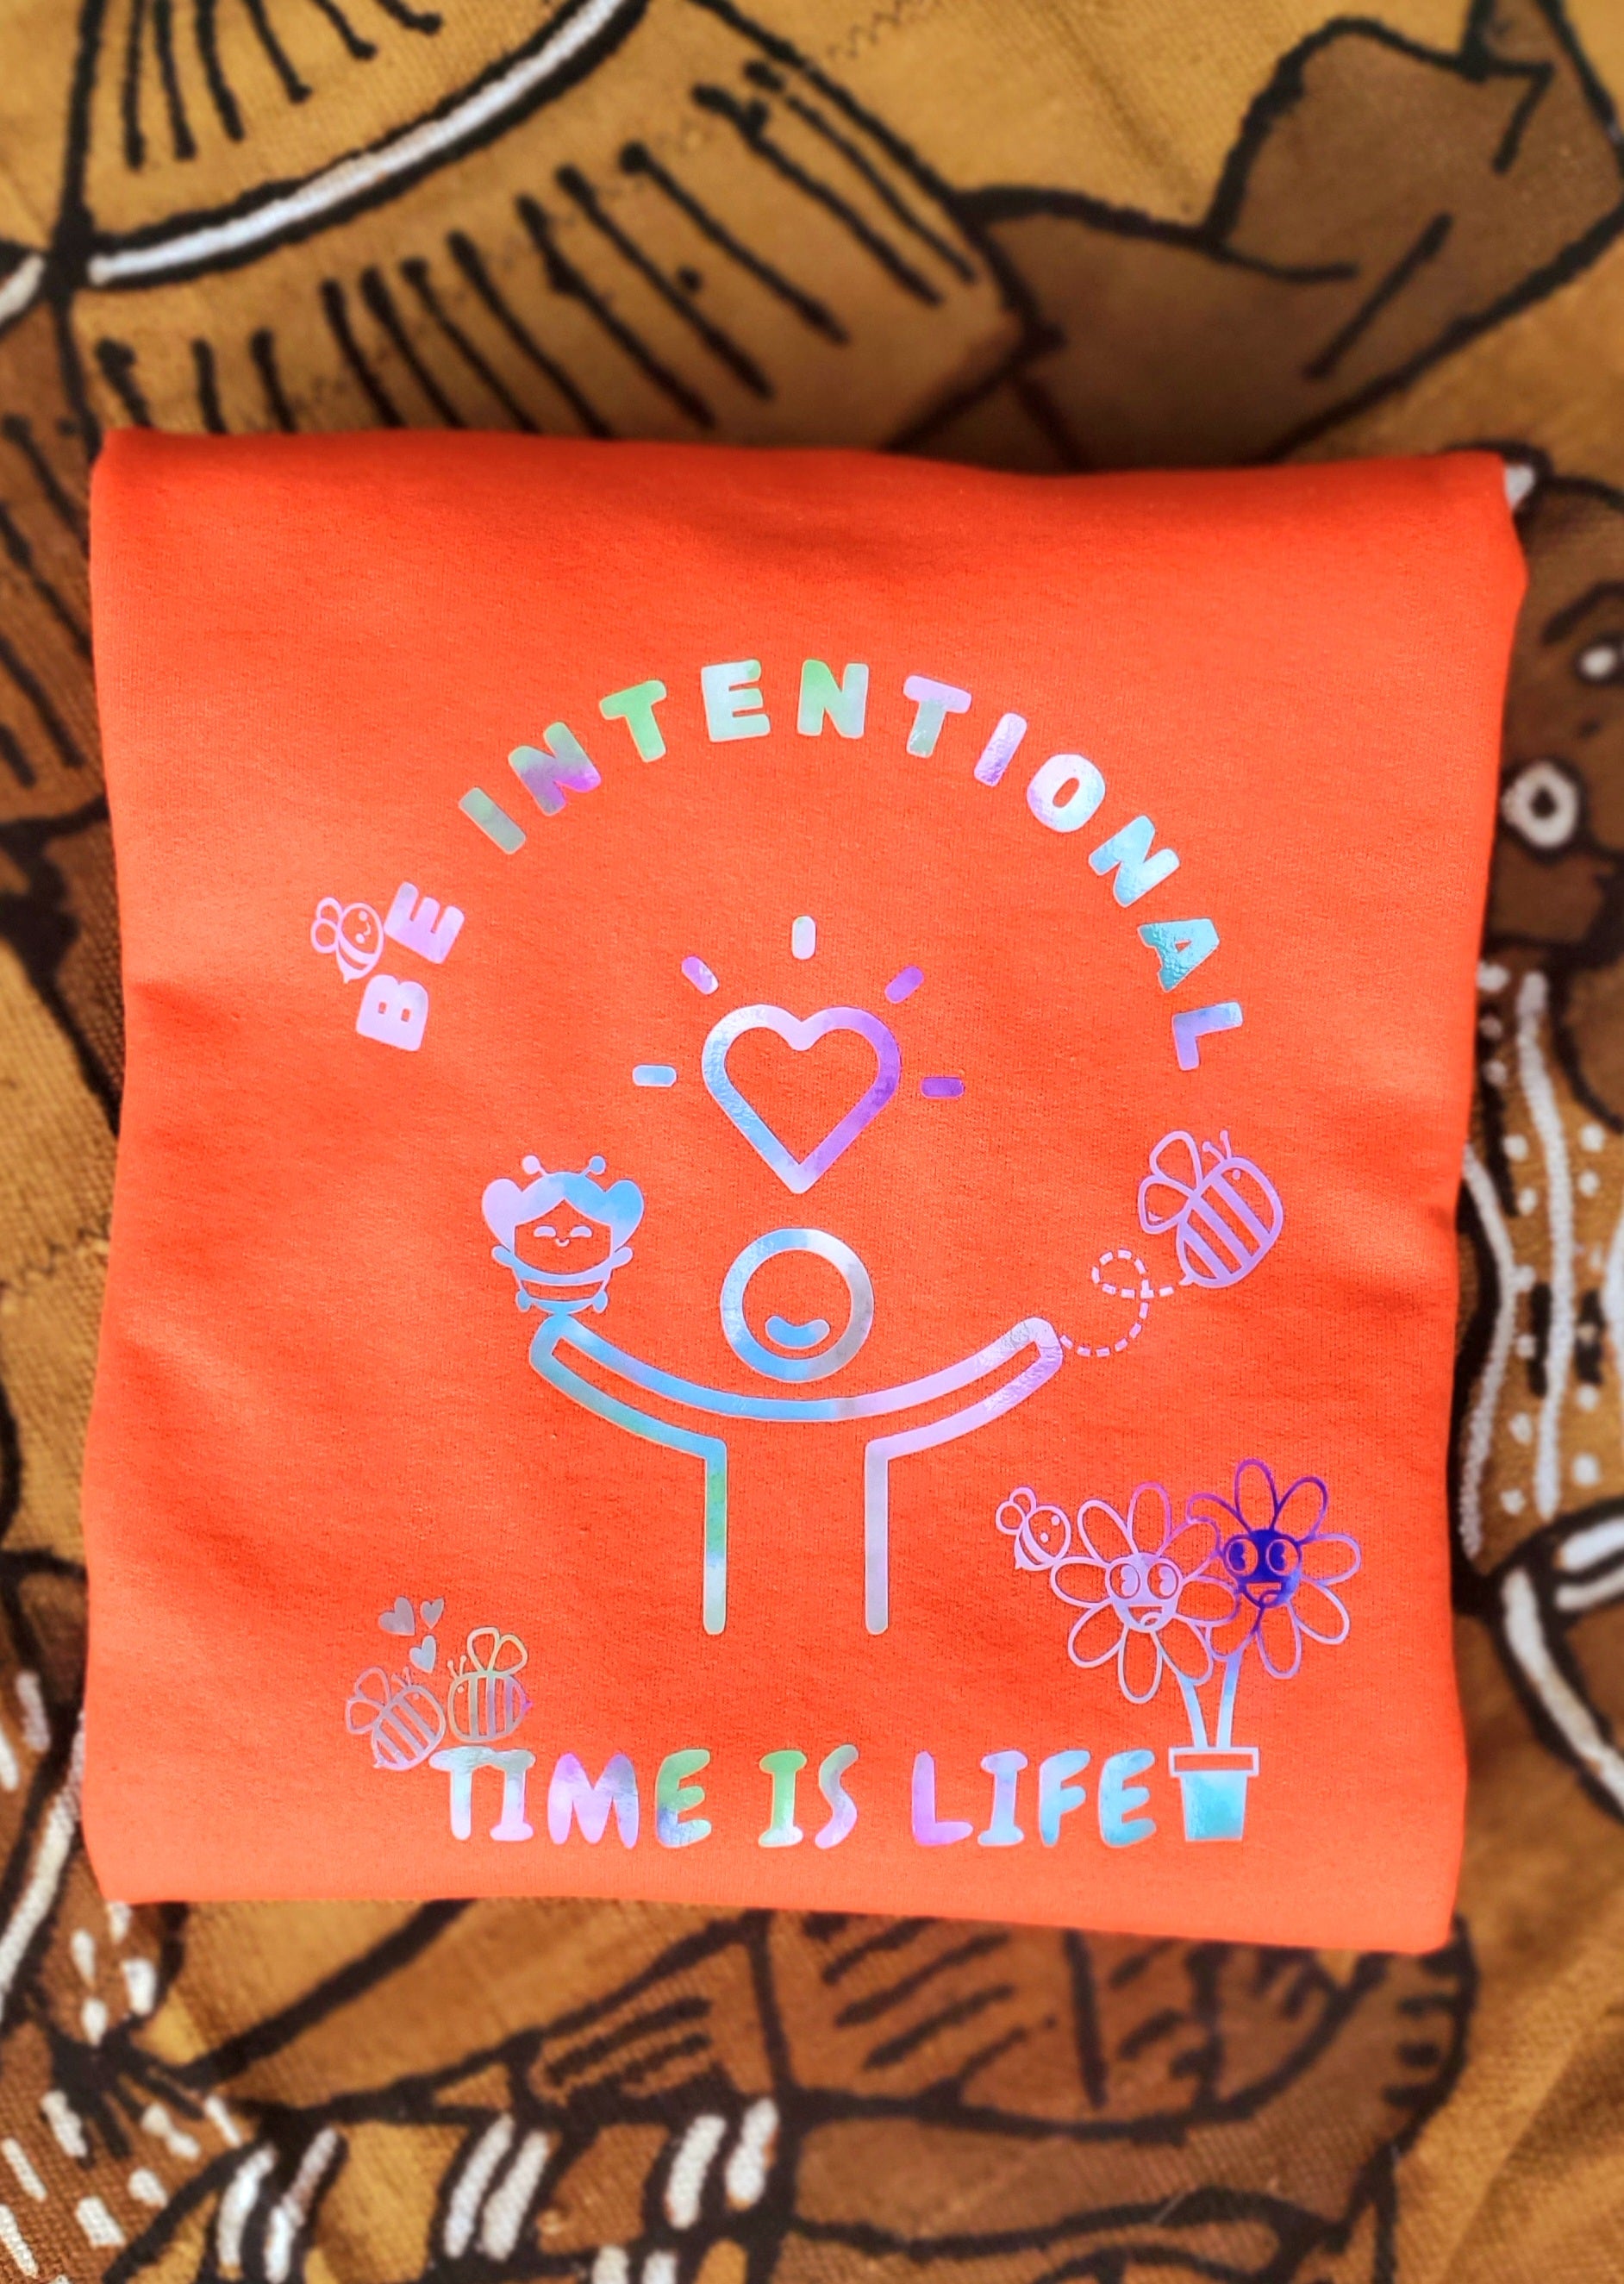 Be intentional Time is life